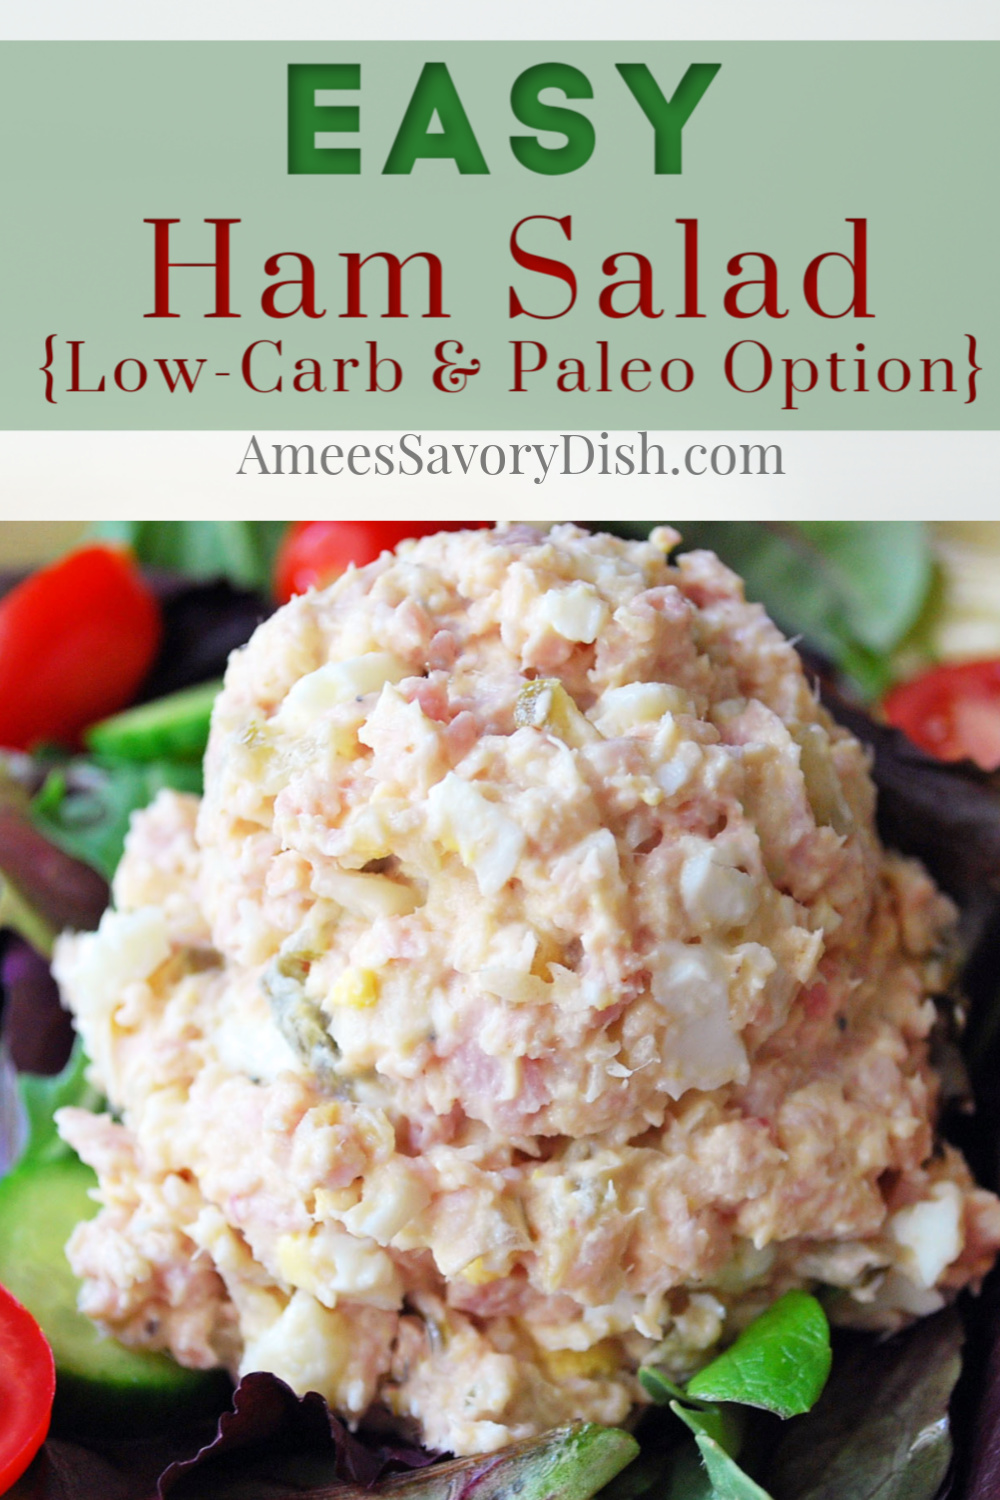 This easy ham salad is a family favorite made with chopped baked ham, hard-boiled eggs, sweet onion, celery, pickles, and mayonnaise. It's the perfect recipe to use up leftover ham! #hamsalad #saladrecipe #ham via @Ameessavorydish